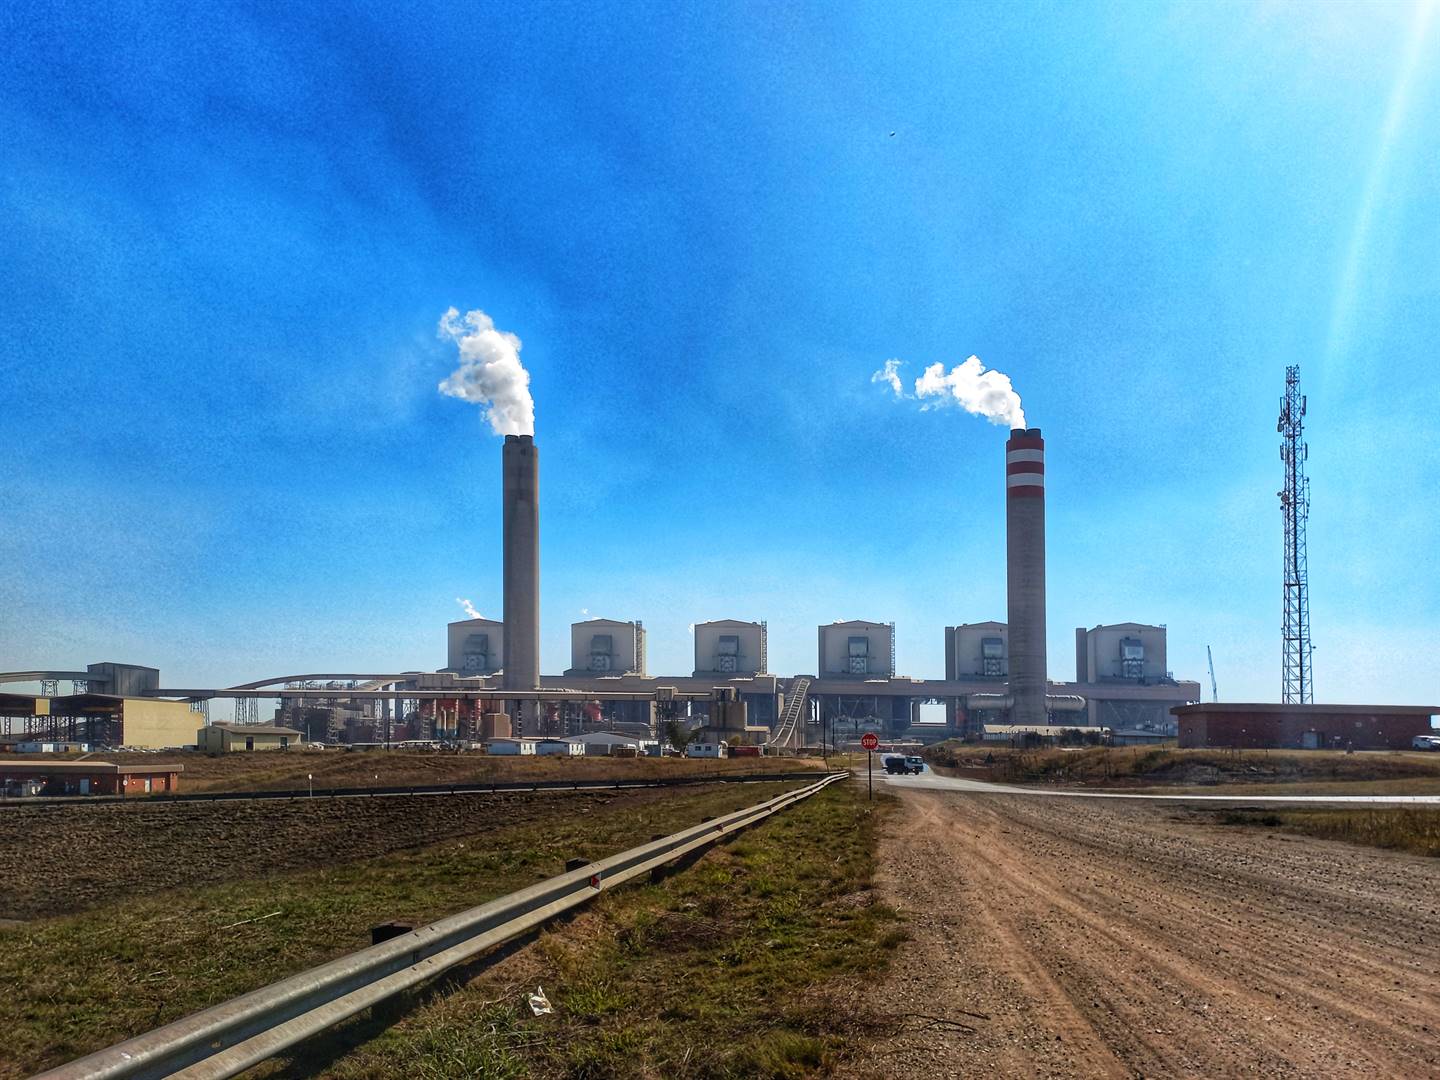 The Kusile power station may not solve the country's power woes even when it is fully online. The project is 10 years late and R80 billion over budget